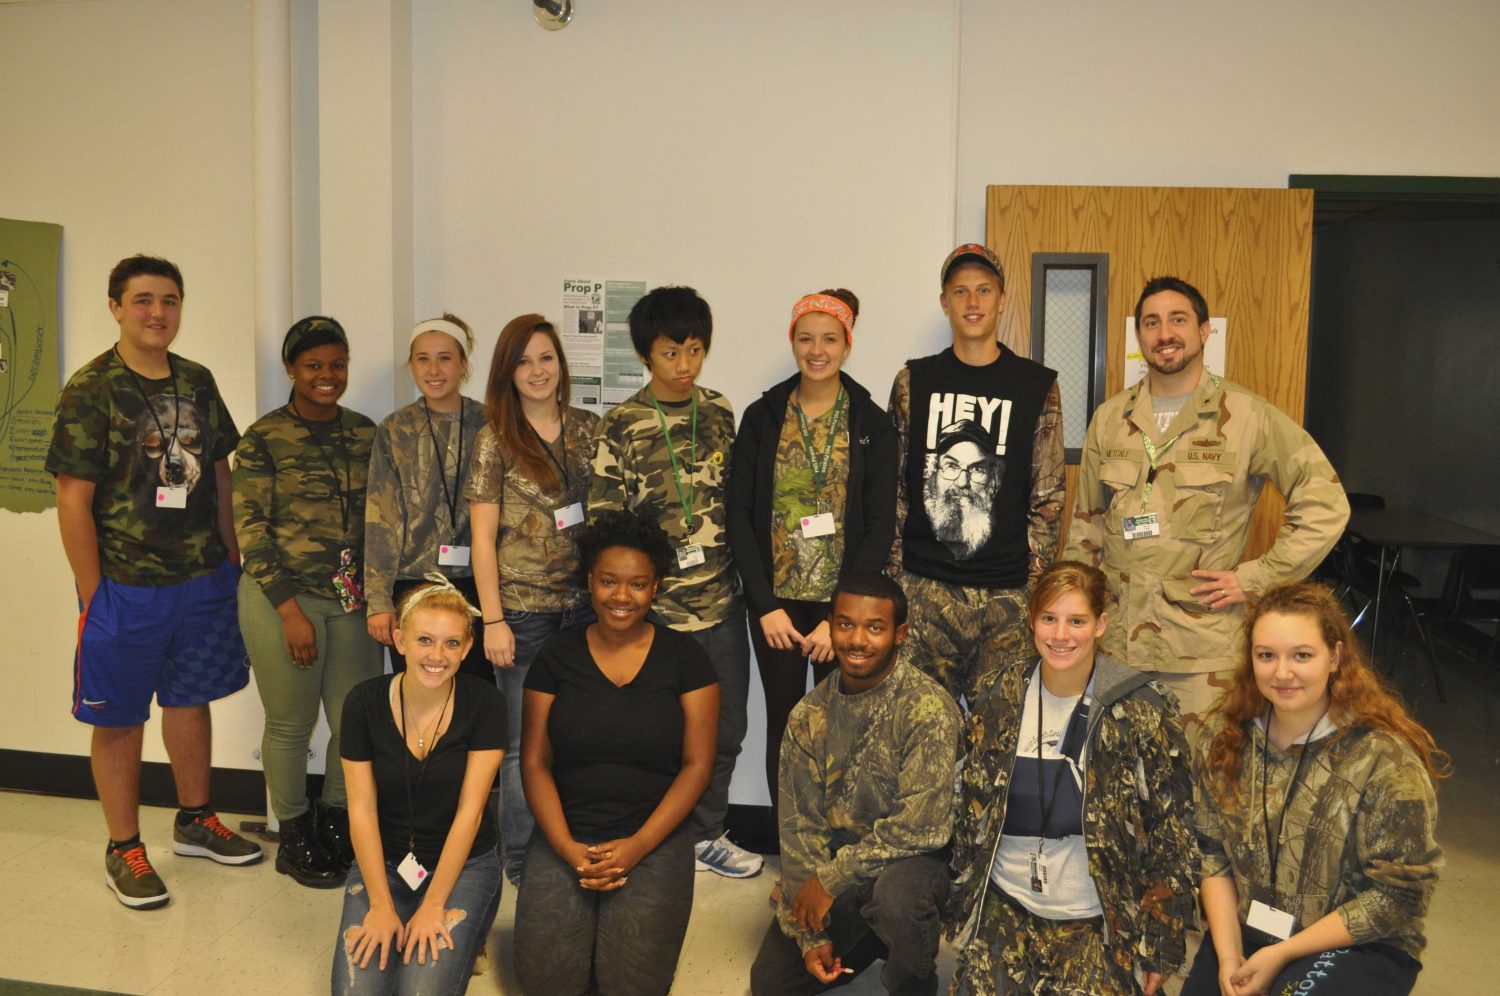 Duck Dynasty/Camo Day has a big turnout